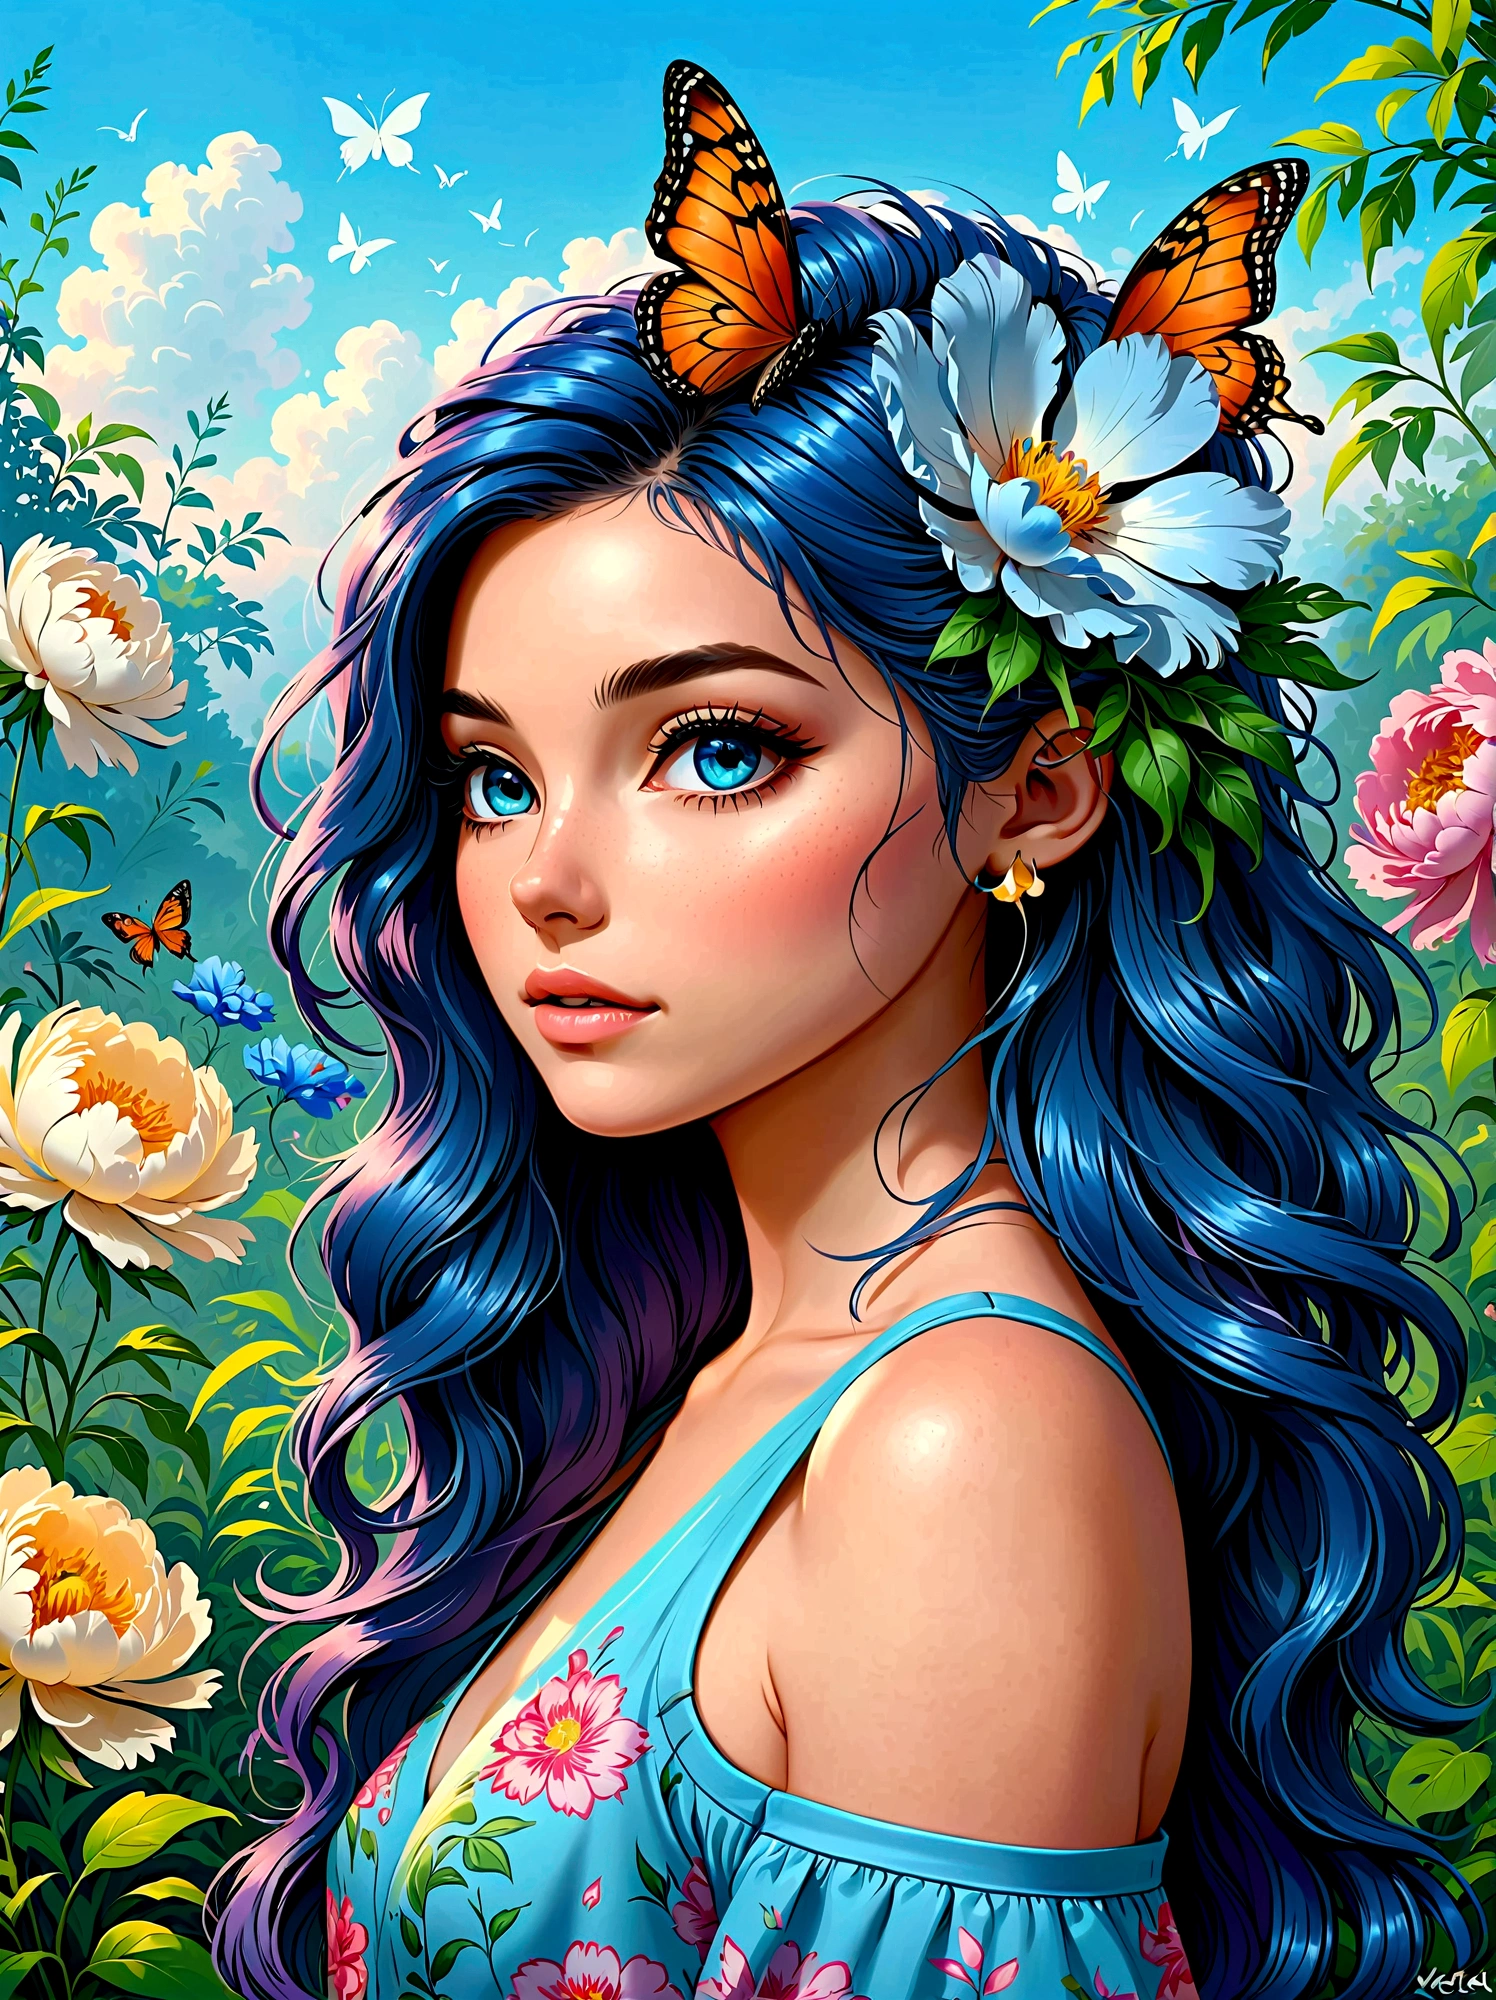 (masterpiece，Best quality:1.2，lifelike:1.4)，Cartoon Characters，Vector illustration，(1girl，Half Body)，Exquisite facial features，Detailed eye drawing，eyelash，Blush，Gorgeous clothes，Colorful hair，Dreadlocks，Unique and wild hairstyle，Exquisite makeup，Blue华丽的汉服，Garden background blurred，concise，Glowing Butterfly，Blue，Giant peony flower, 1kexx1